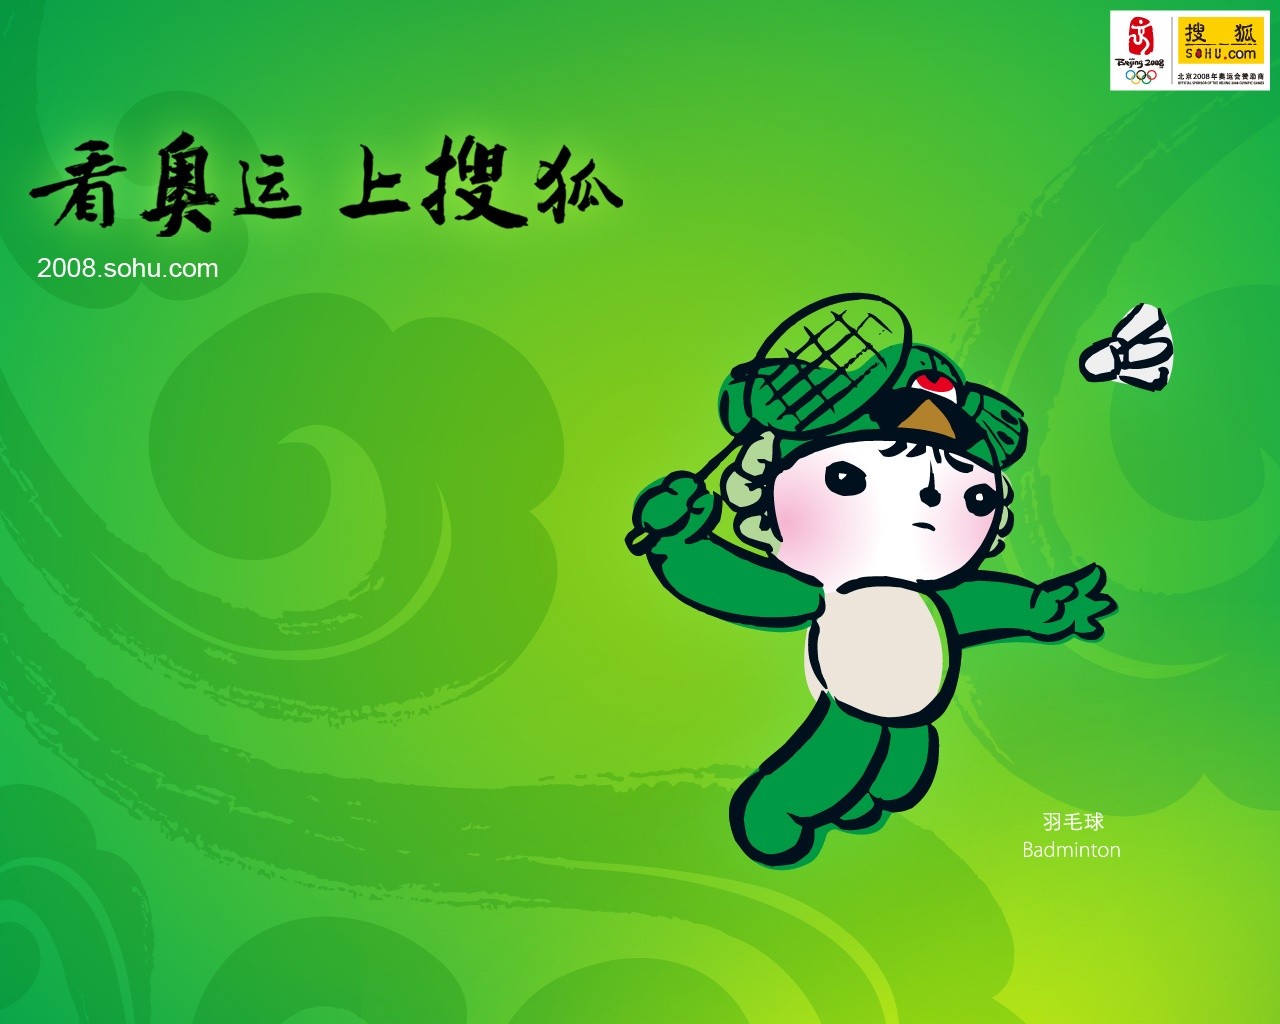 08 Olympic Games Fuwa Wallpapers #36 - 1280x1024